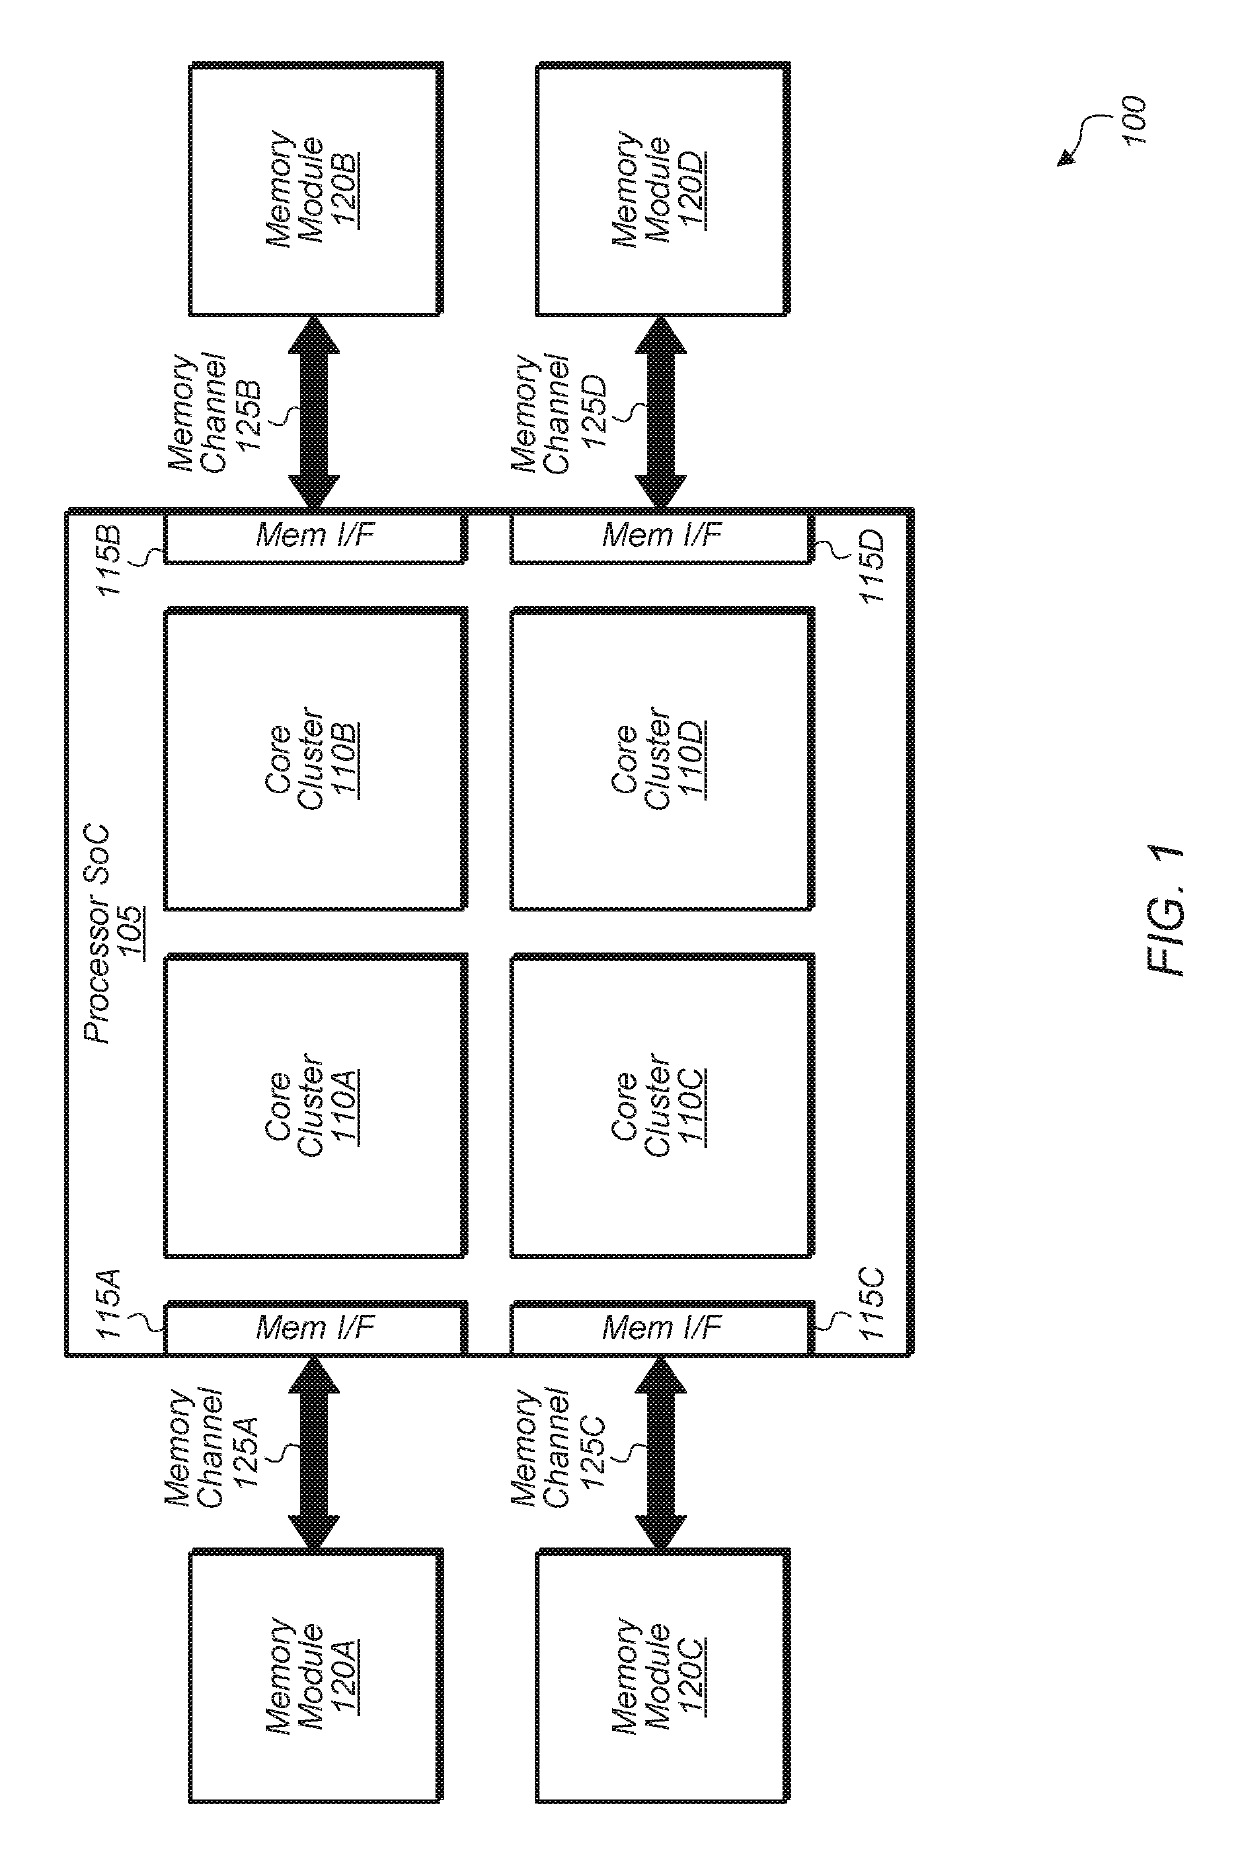 Per-page control of physical address space distribution among memory modules